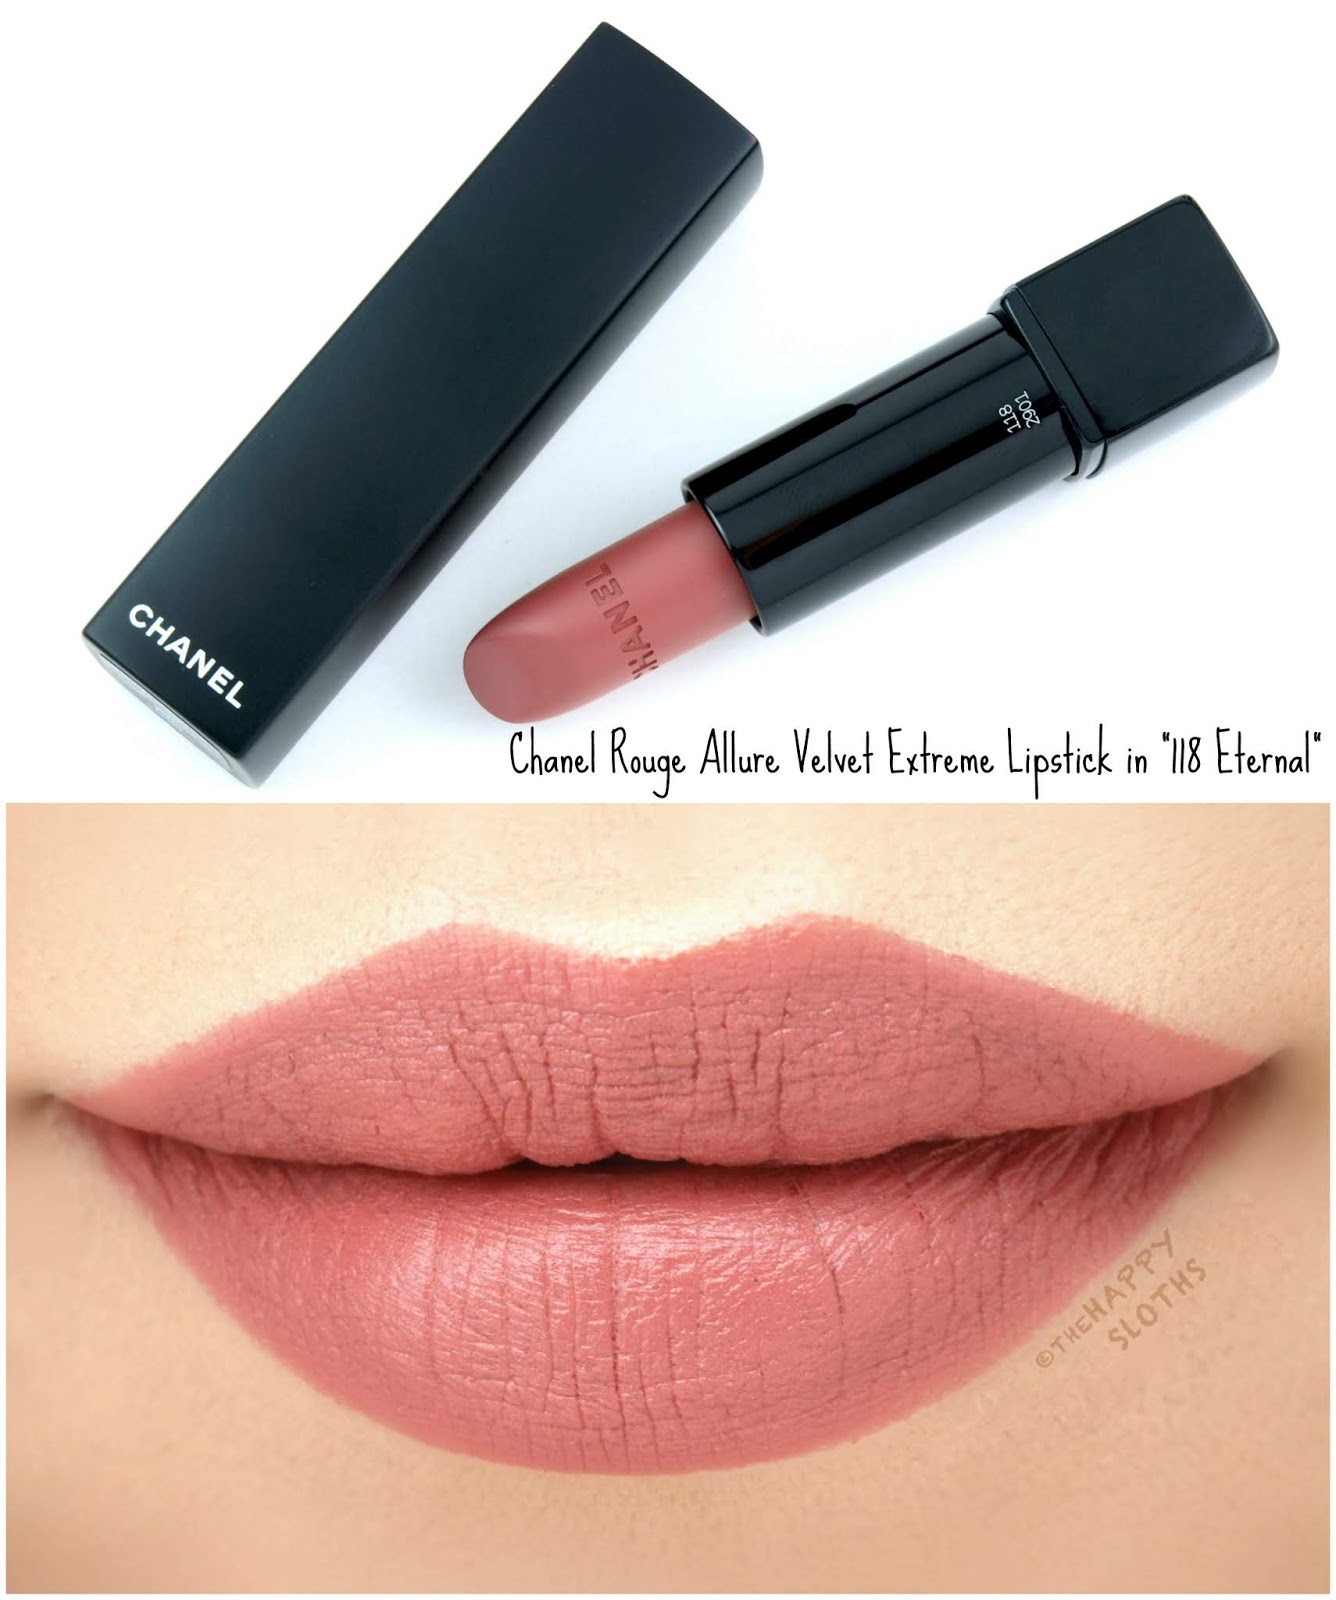 Chanel | Rouge Allure Velvet Extreme Lipstick: Review and Swatches | The  Happy Sloths: Beauty, Makeup, and Skincare Blog with Reviews and Swatches